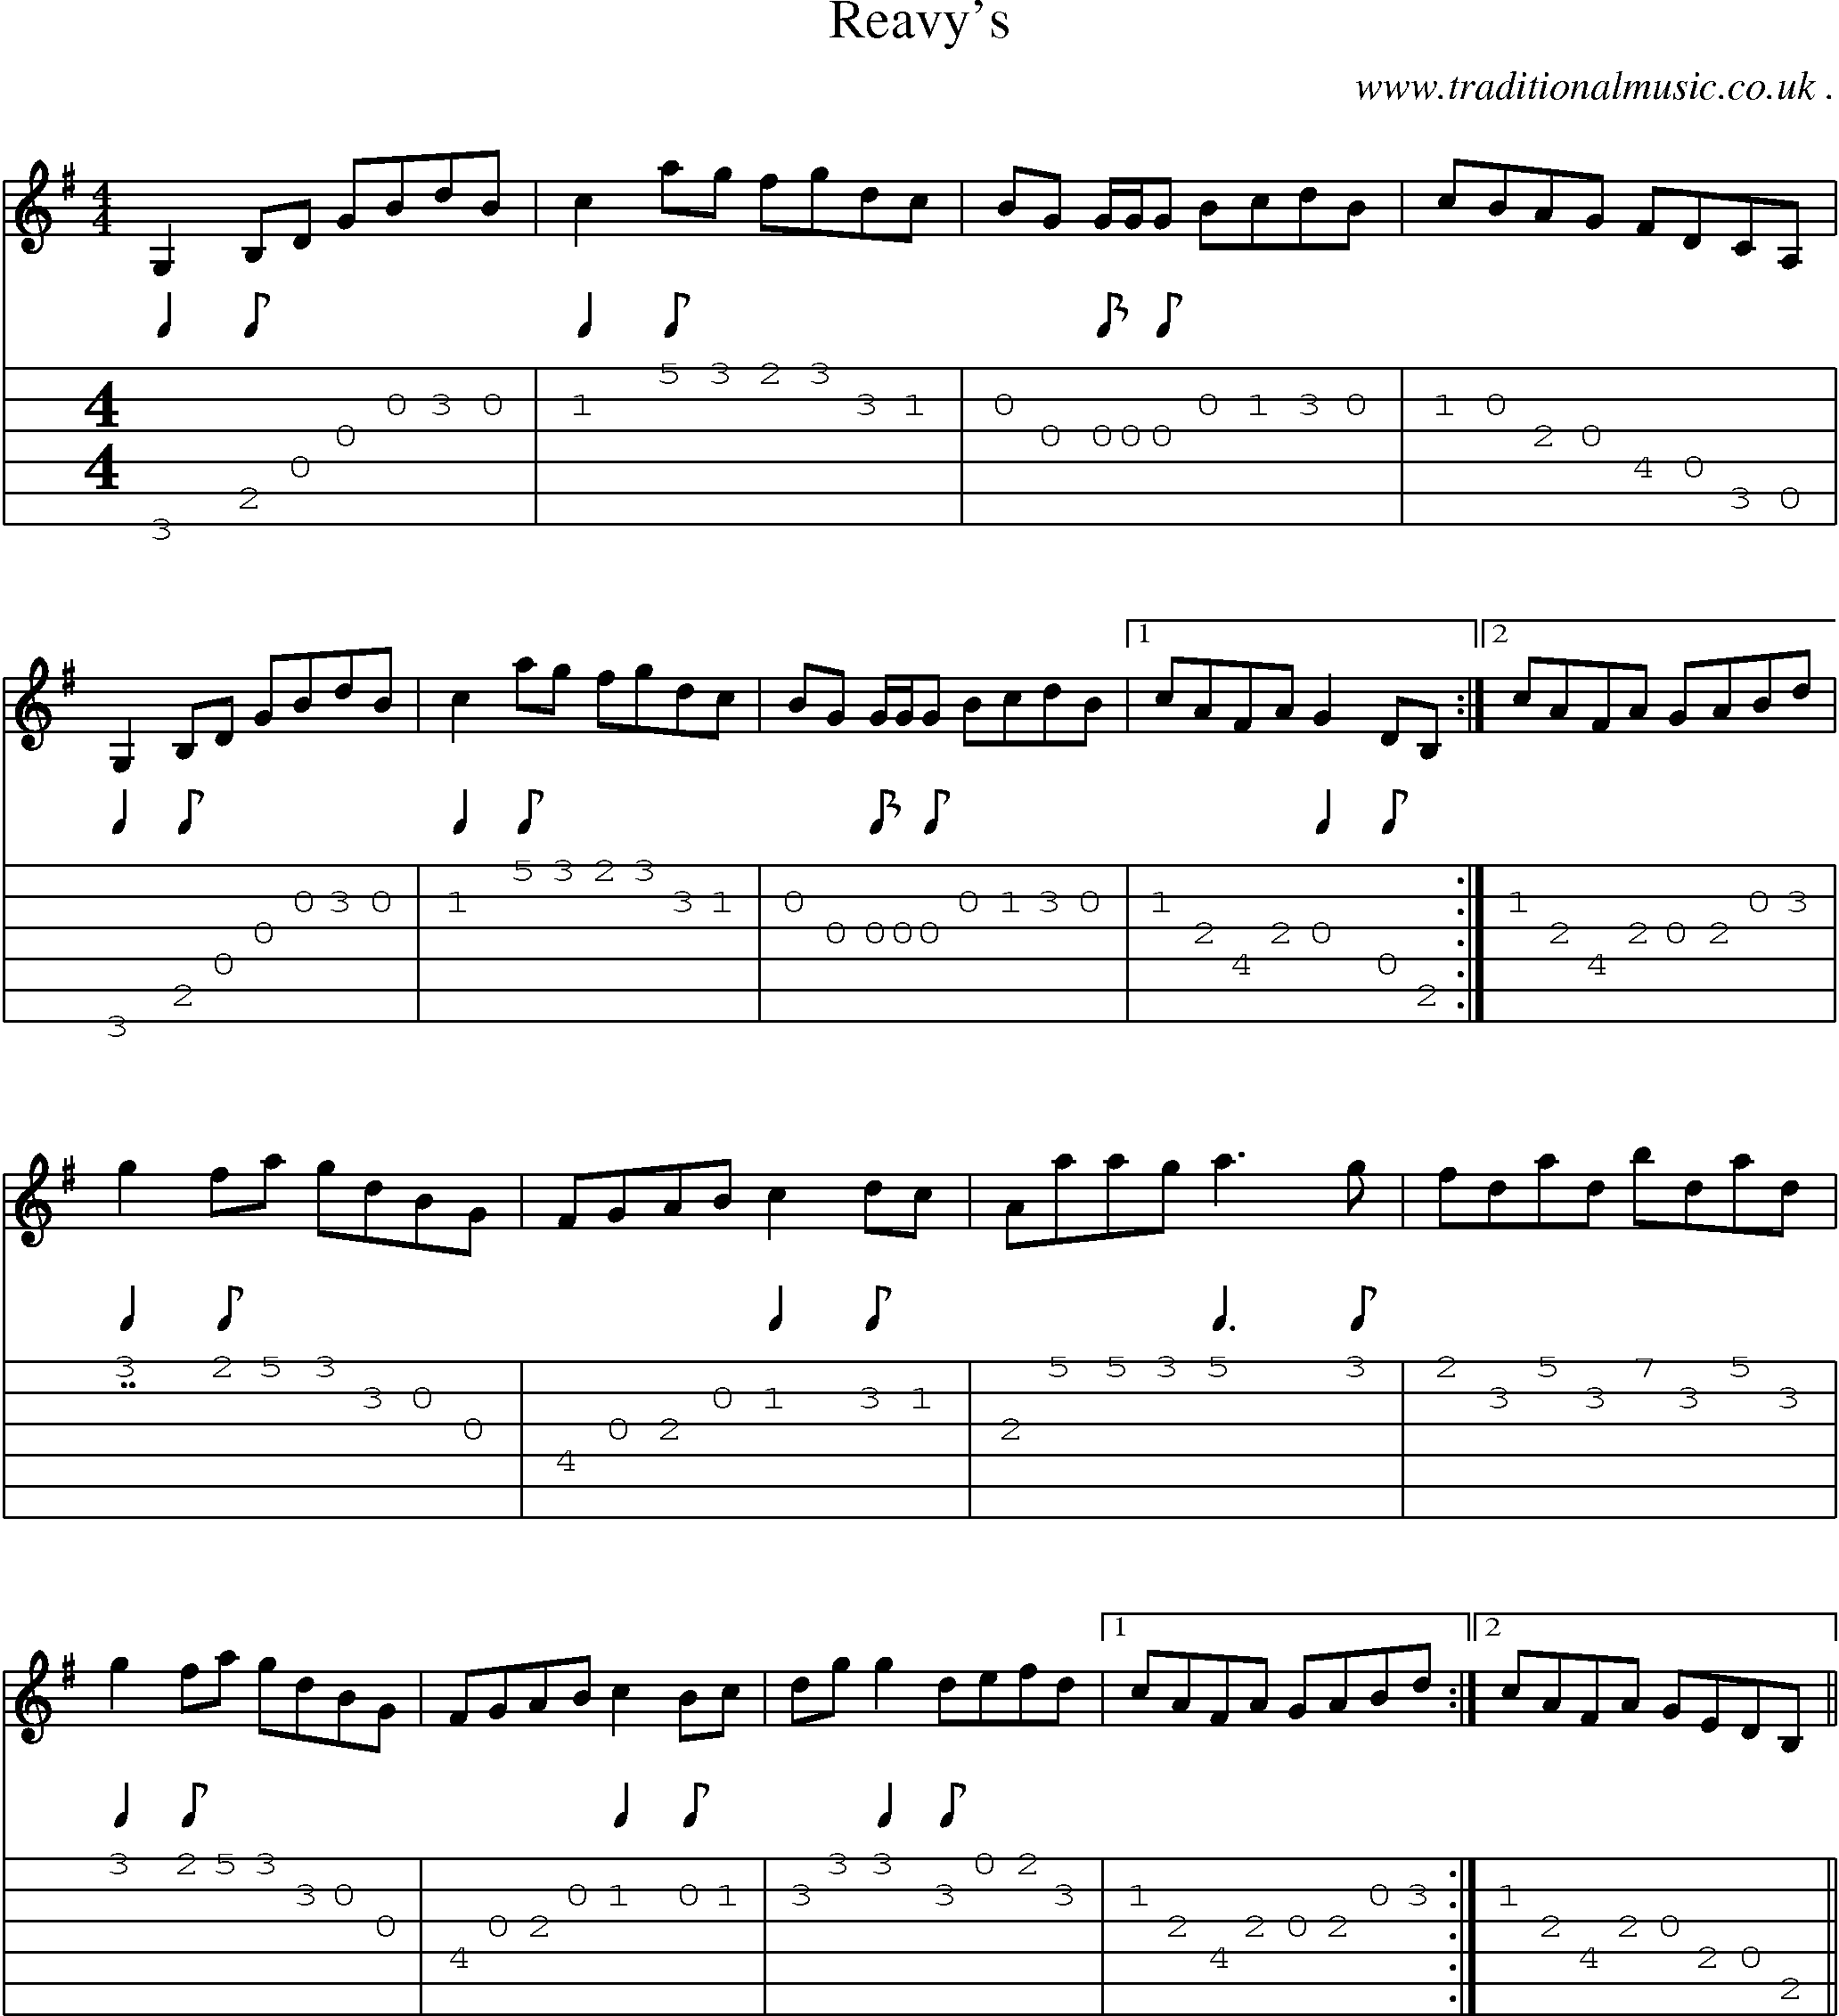 Sheet-Music and Guitar Tabs for Reavys